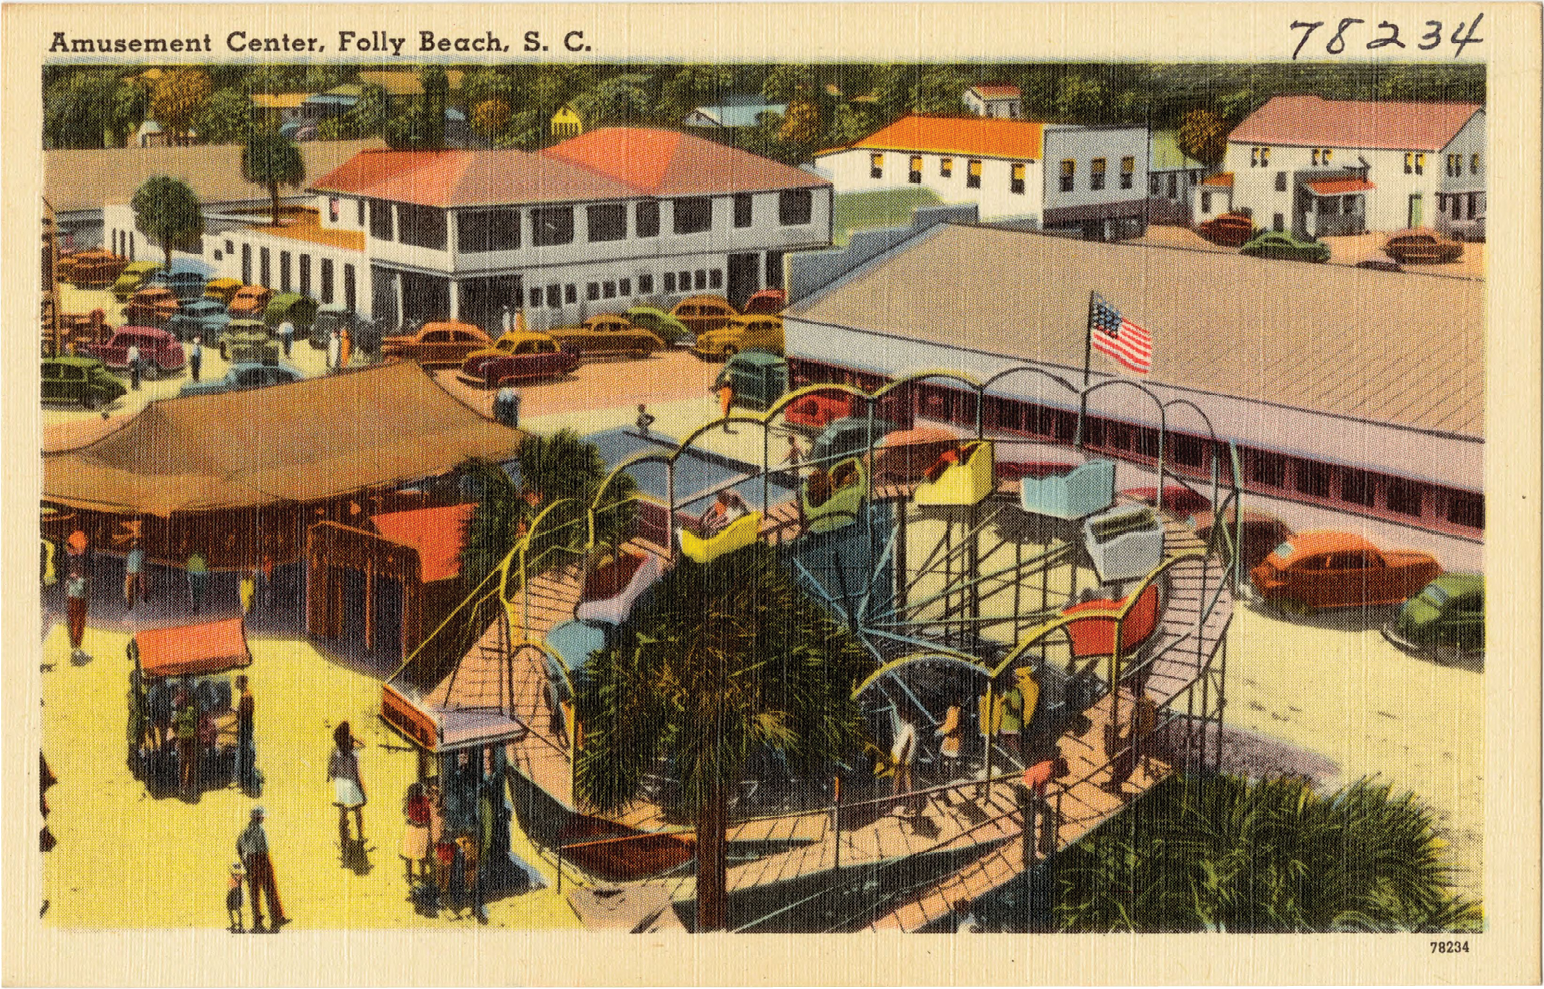 Pavilions &amp; Amusement Centers: Folly Beach (above) and Isle of Palms “The Isle of Palms, with its wide, smooth beach, is unsurpassed anywhere in North America. The sand is fine, white and clean...”